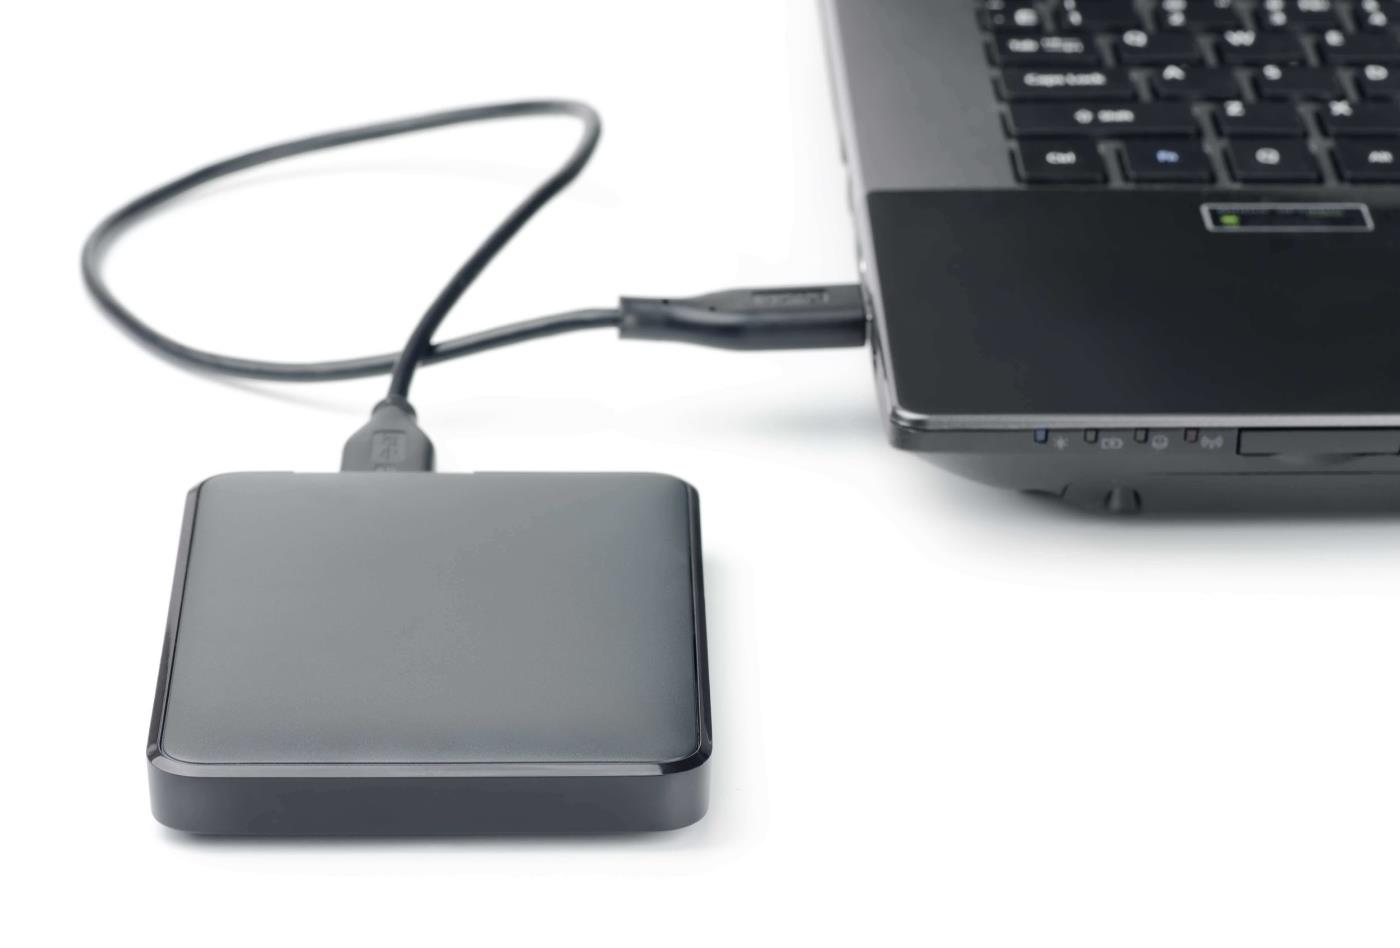 How To Convert Your Old Hard Drive To An External Drive